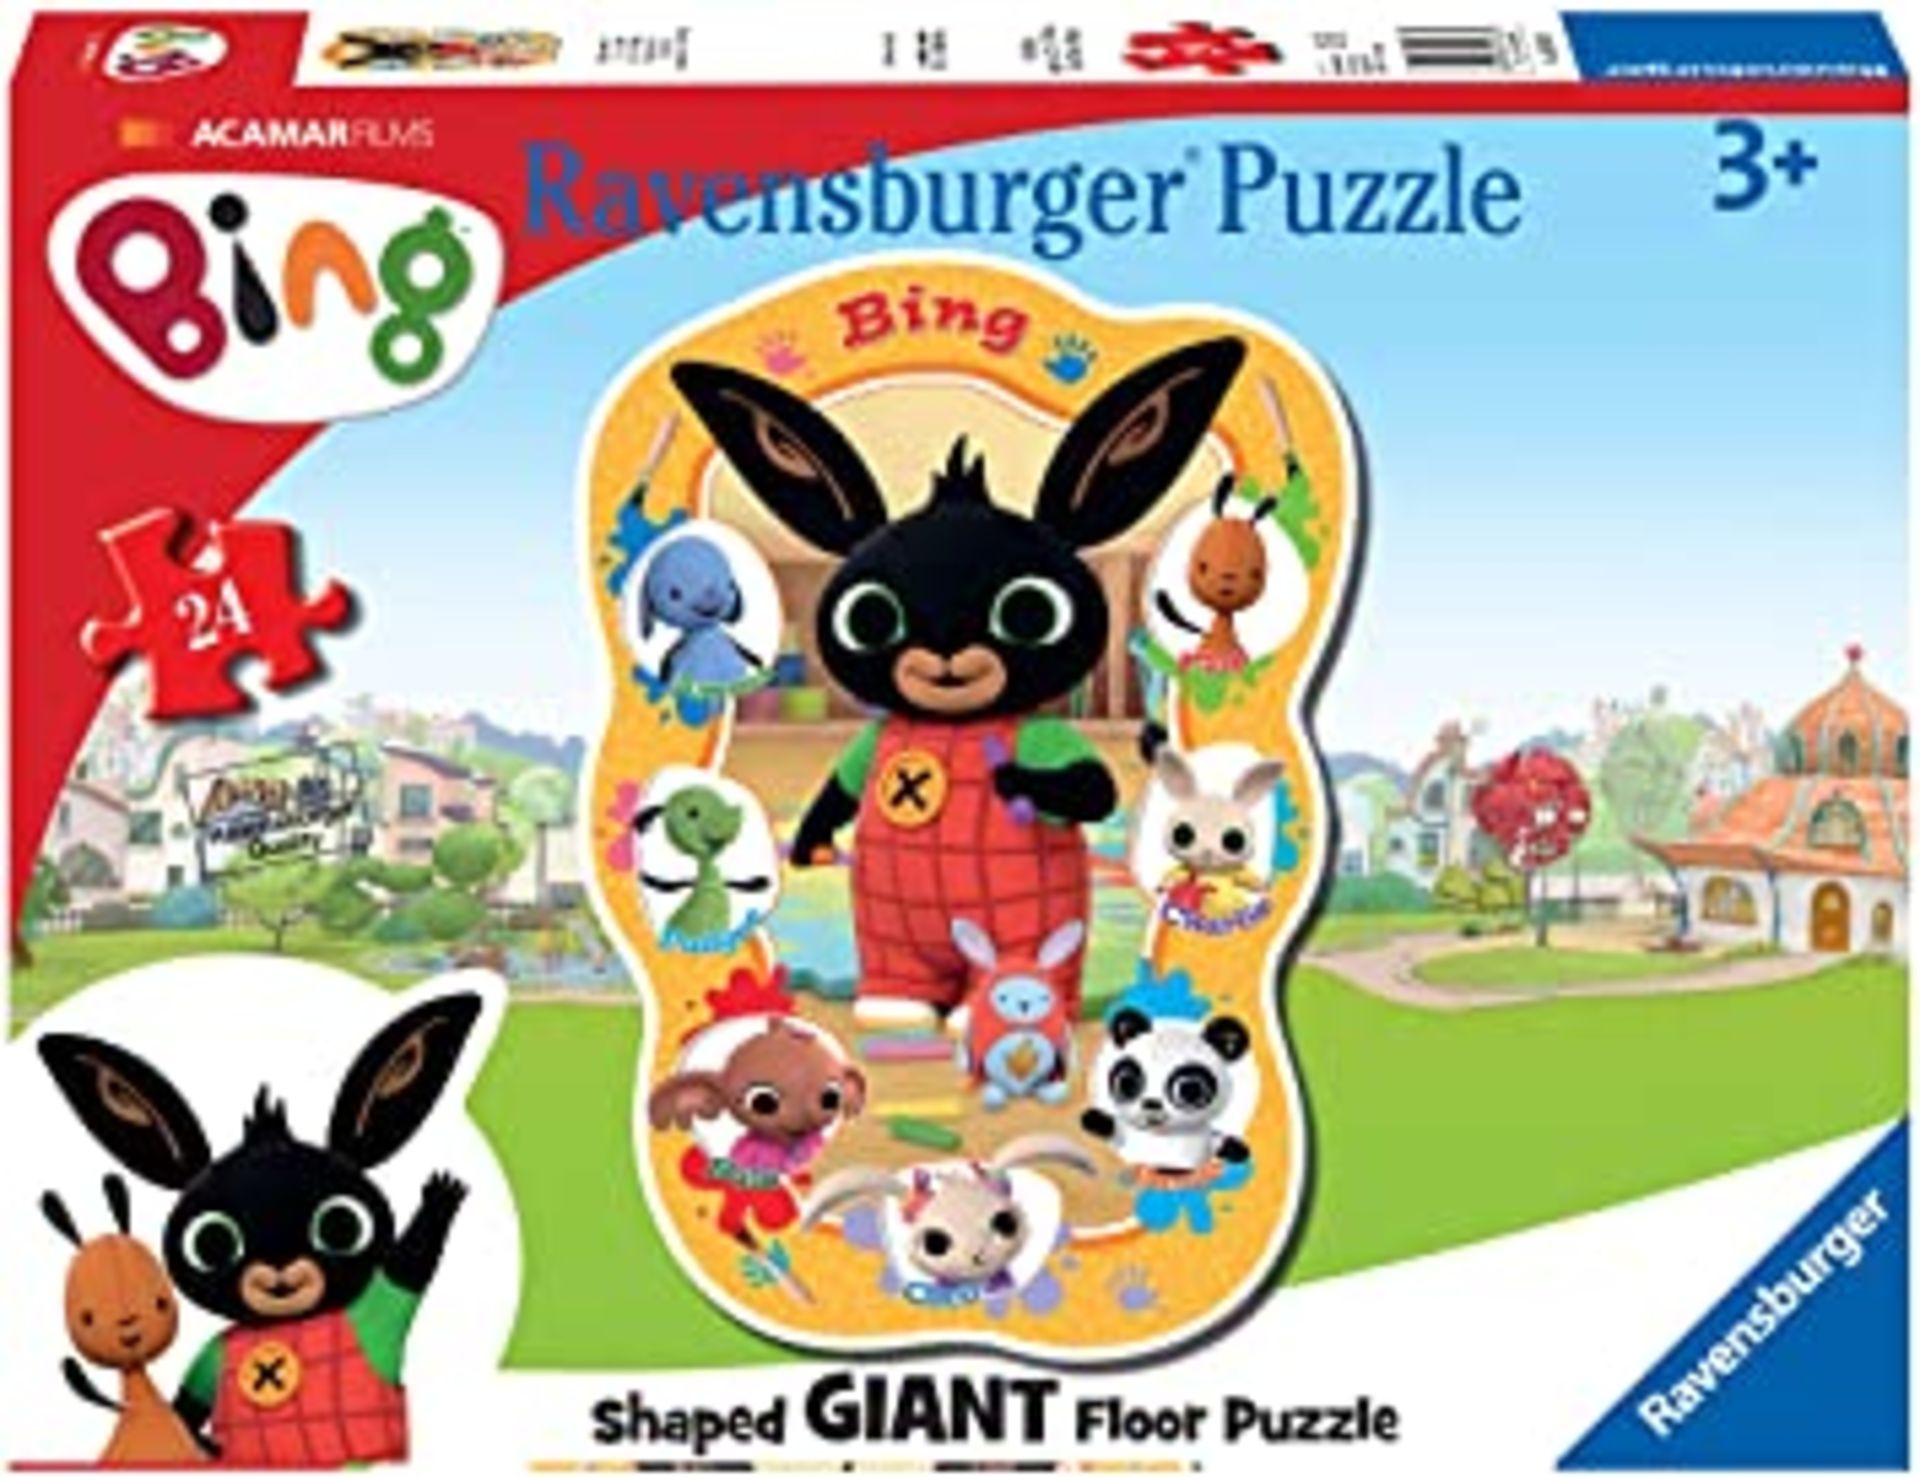 RRP - £13.60 Ravensburger Bing Bunny 24 Piece Giant Floor Jigsaw Puzzle for Kids Age 3 Years Up